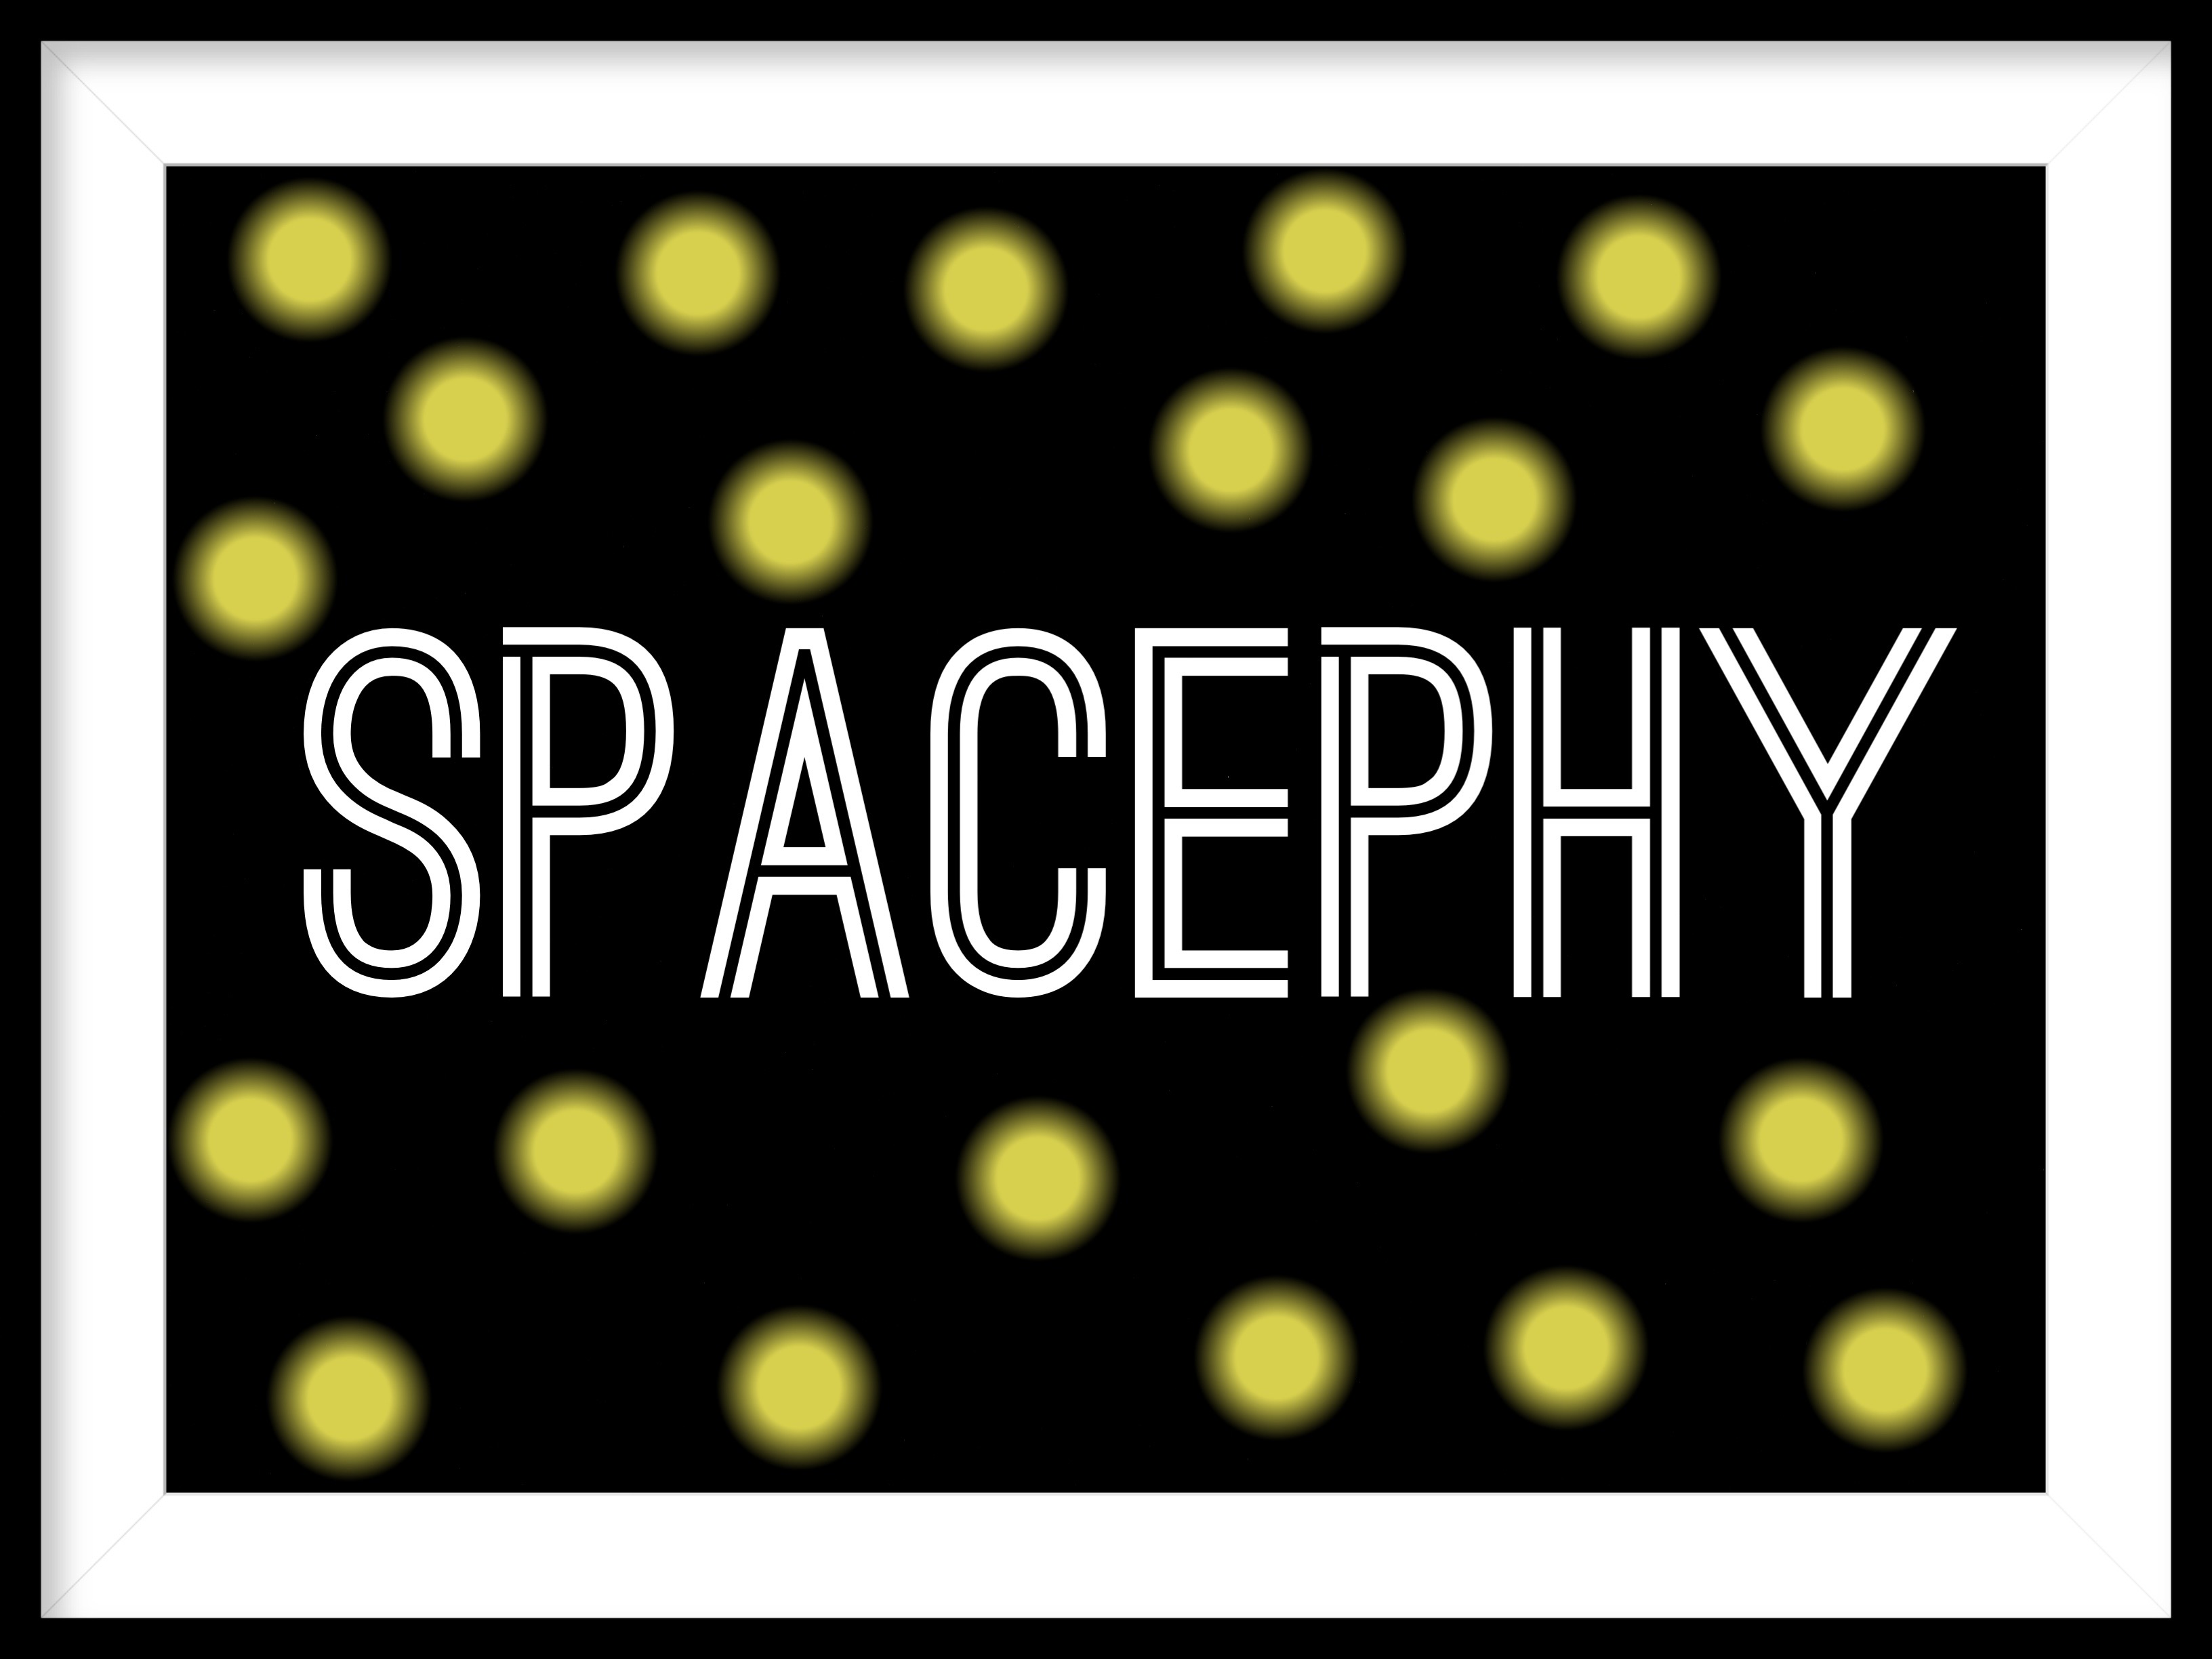 SpacePHY